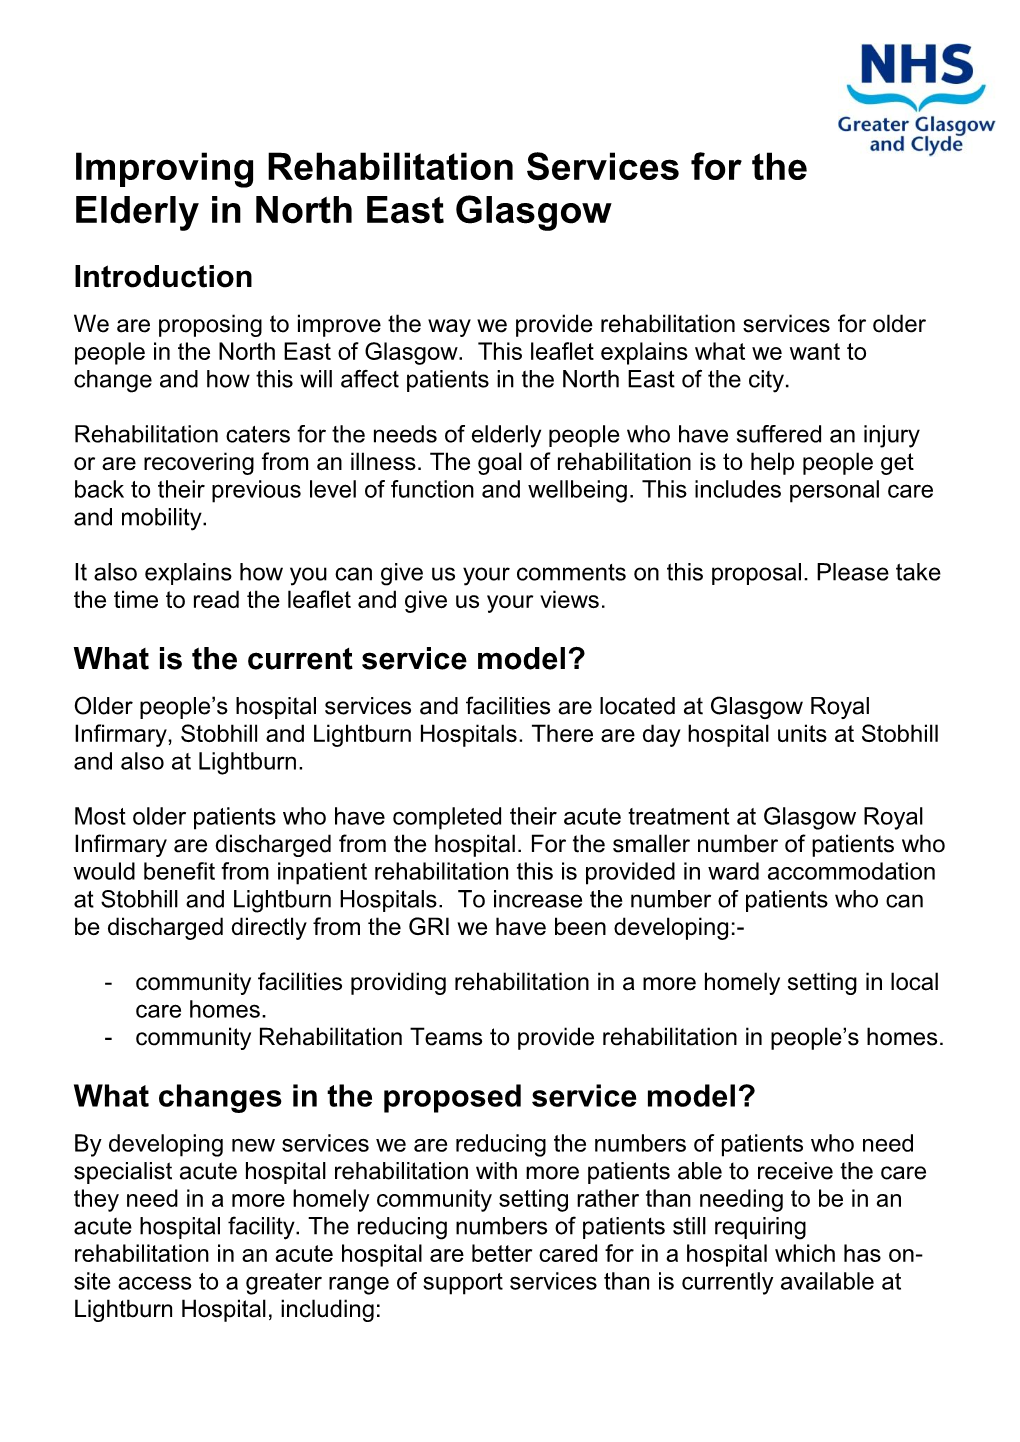 Improving Rehabilitation Services for the Elderly in North East Glasgow